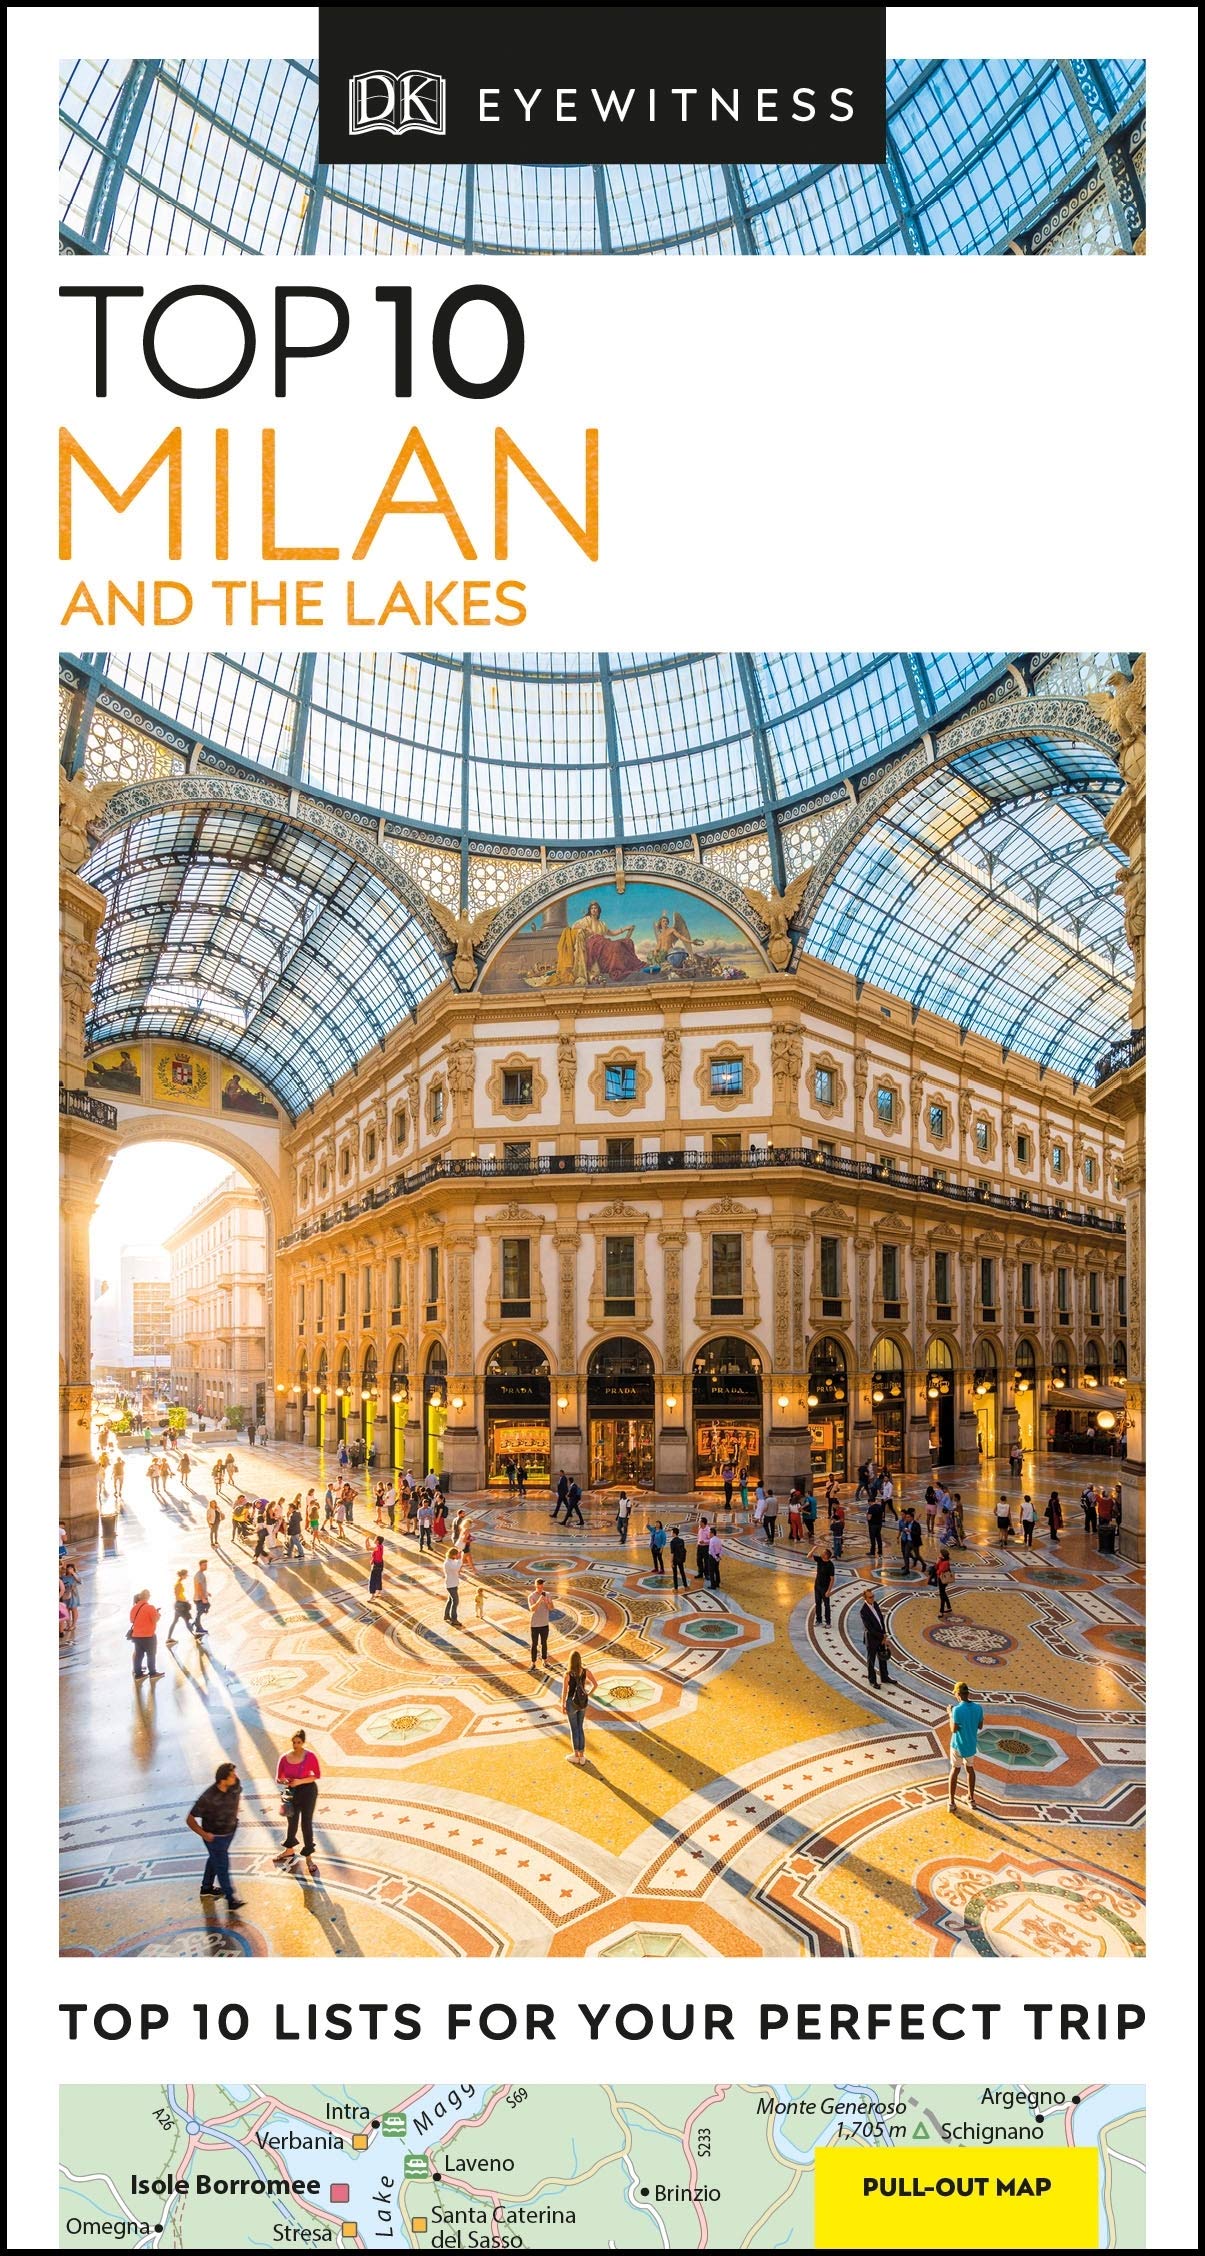  Milan and the Lakes, Top 10